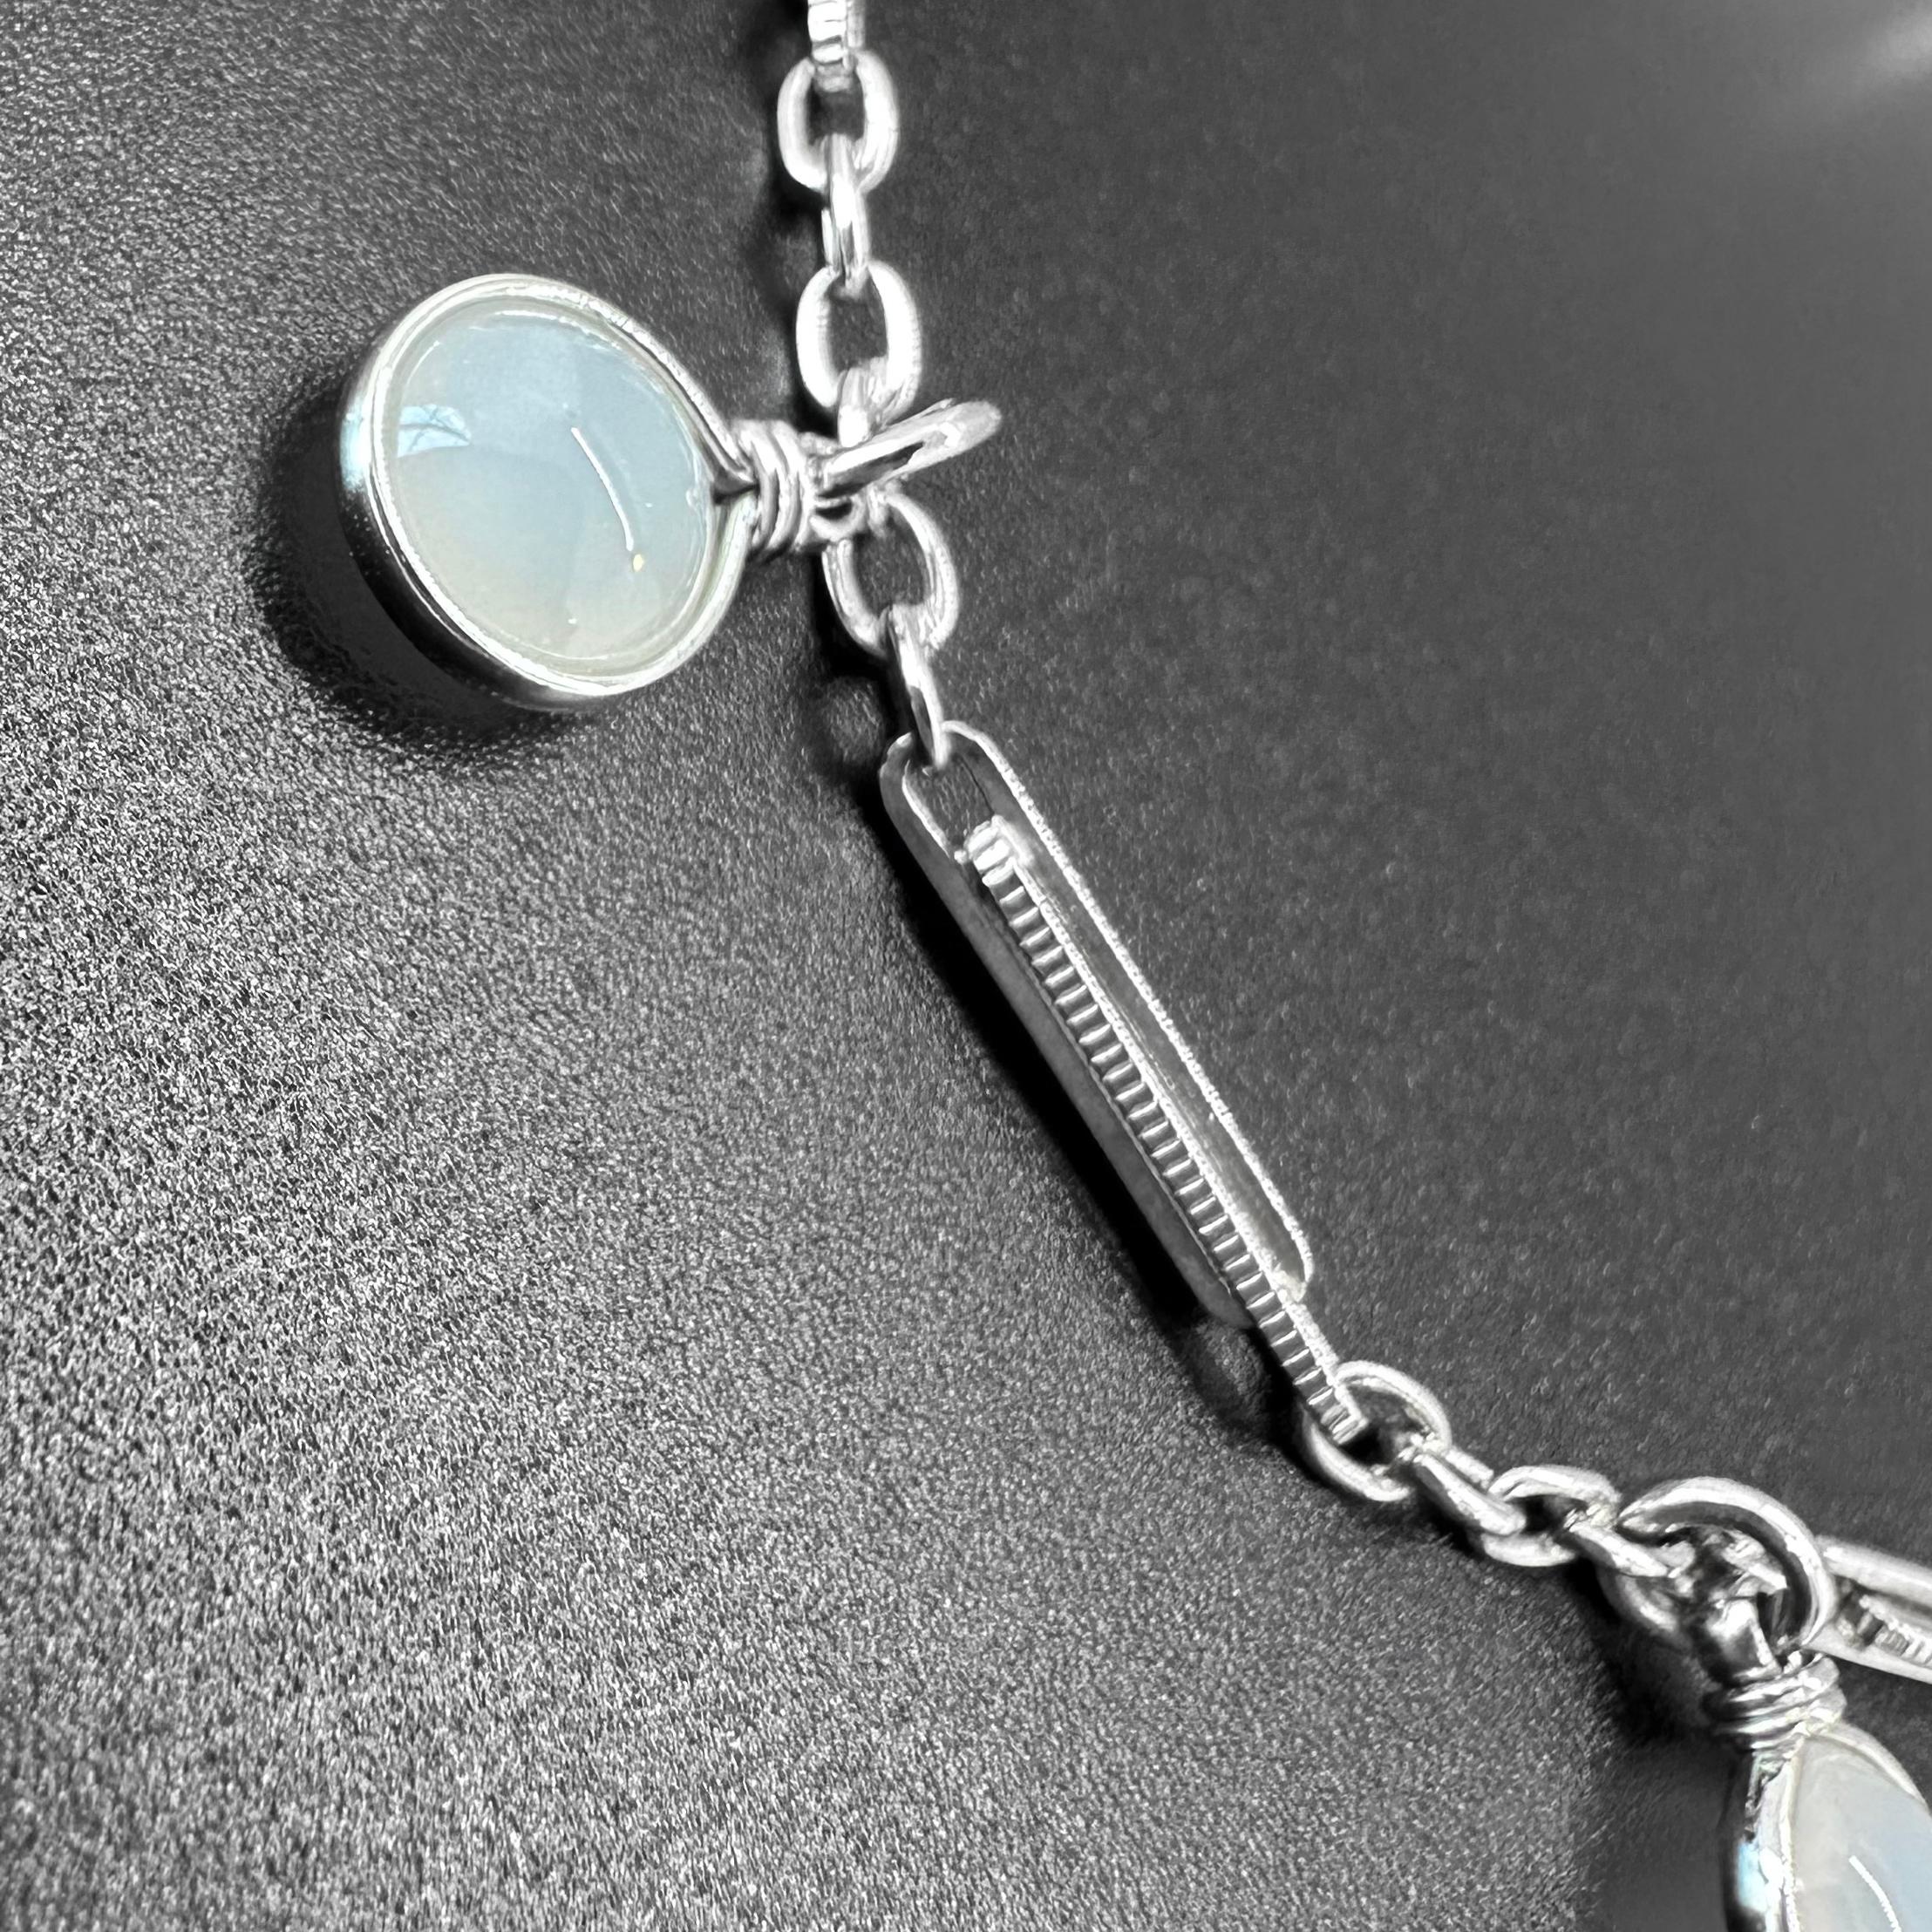 Sugarloaf Cabochon Upcycled watch fob chain and moonstone charm bracelet by Glitter and Gold Studio For Sale